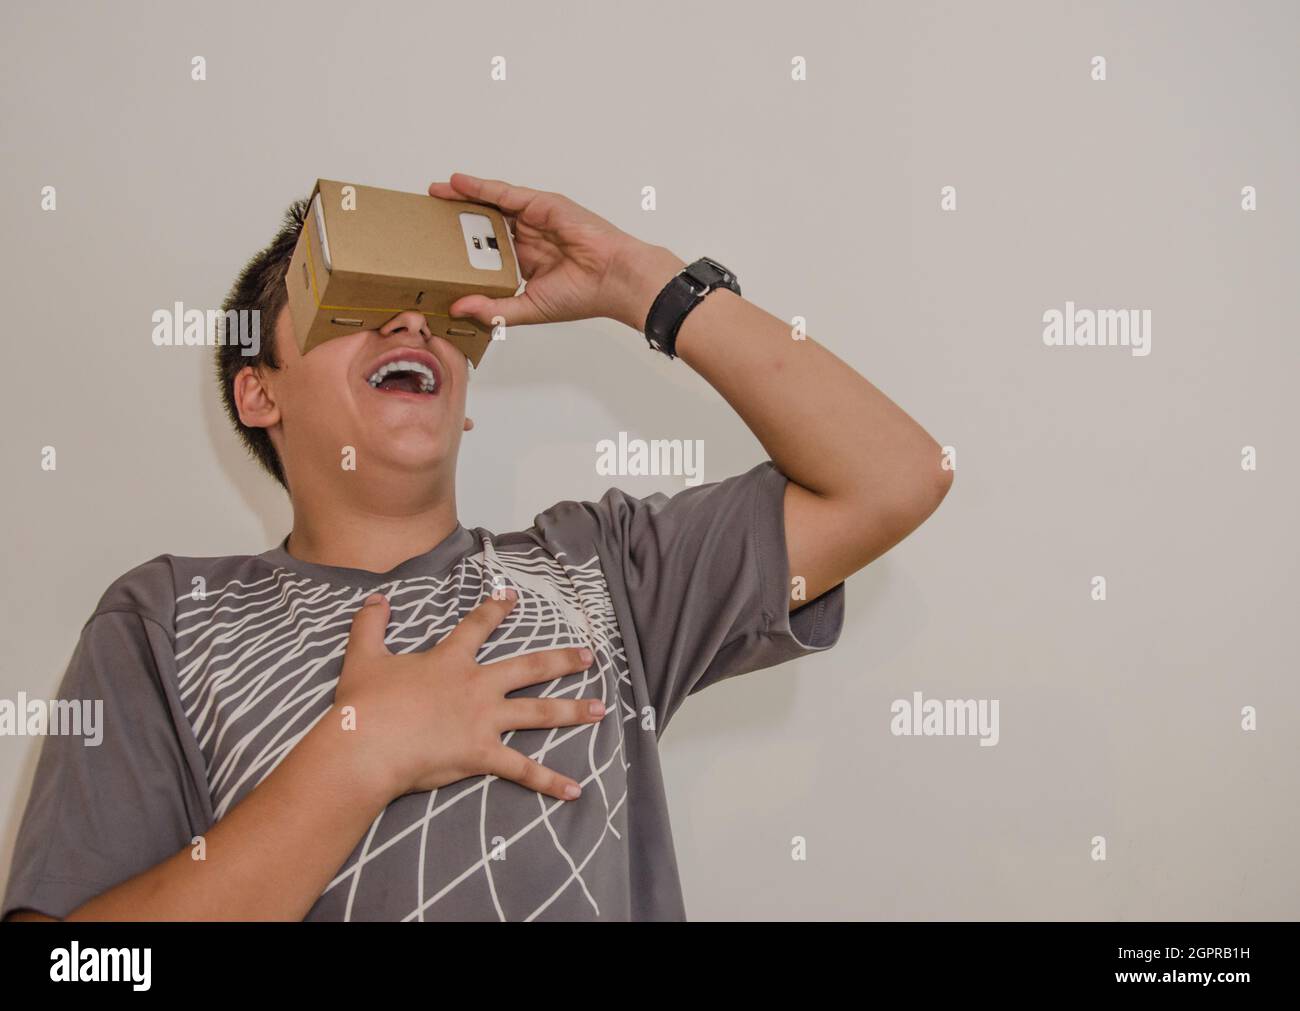 Laughing Teenager Boy Covering Eyes With Smart Phone In Cardboard Box Stock Photo